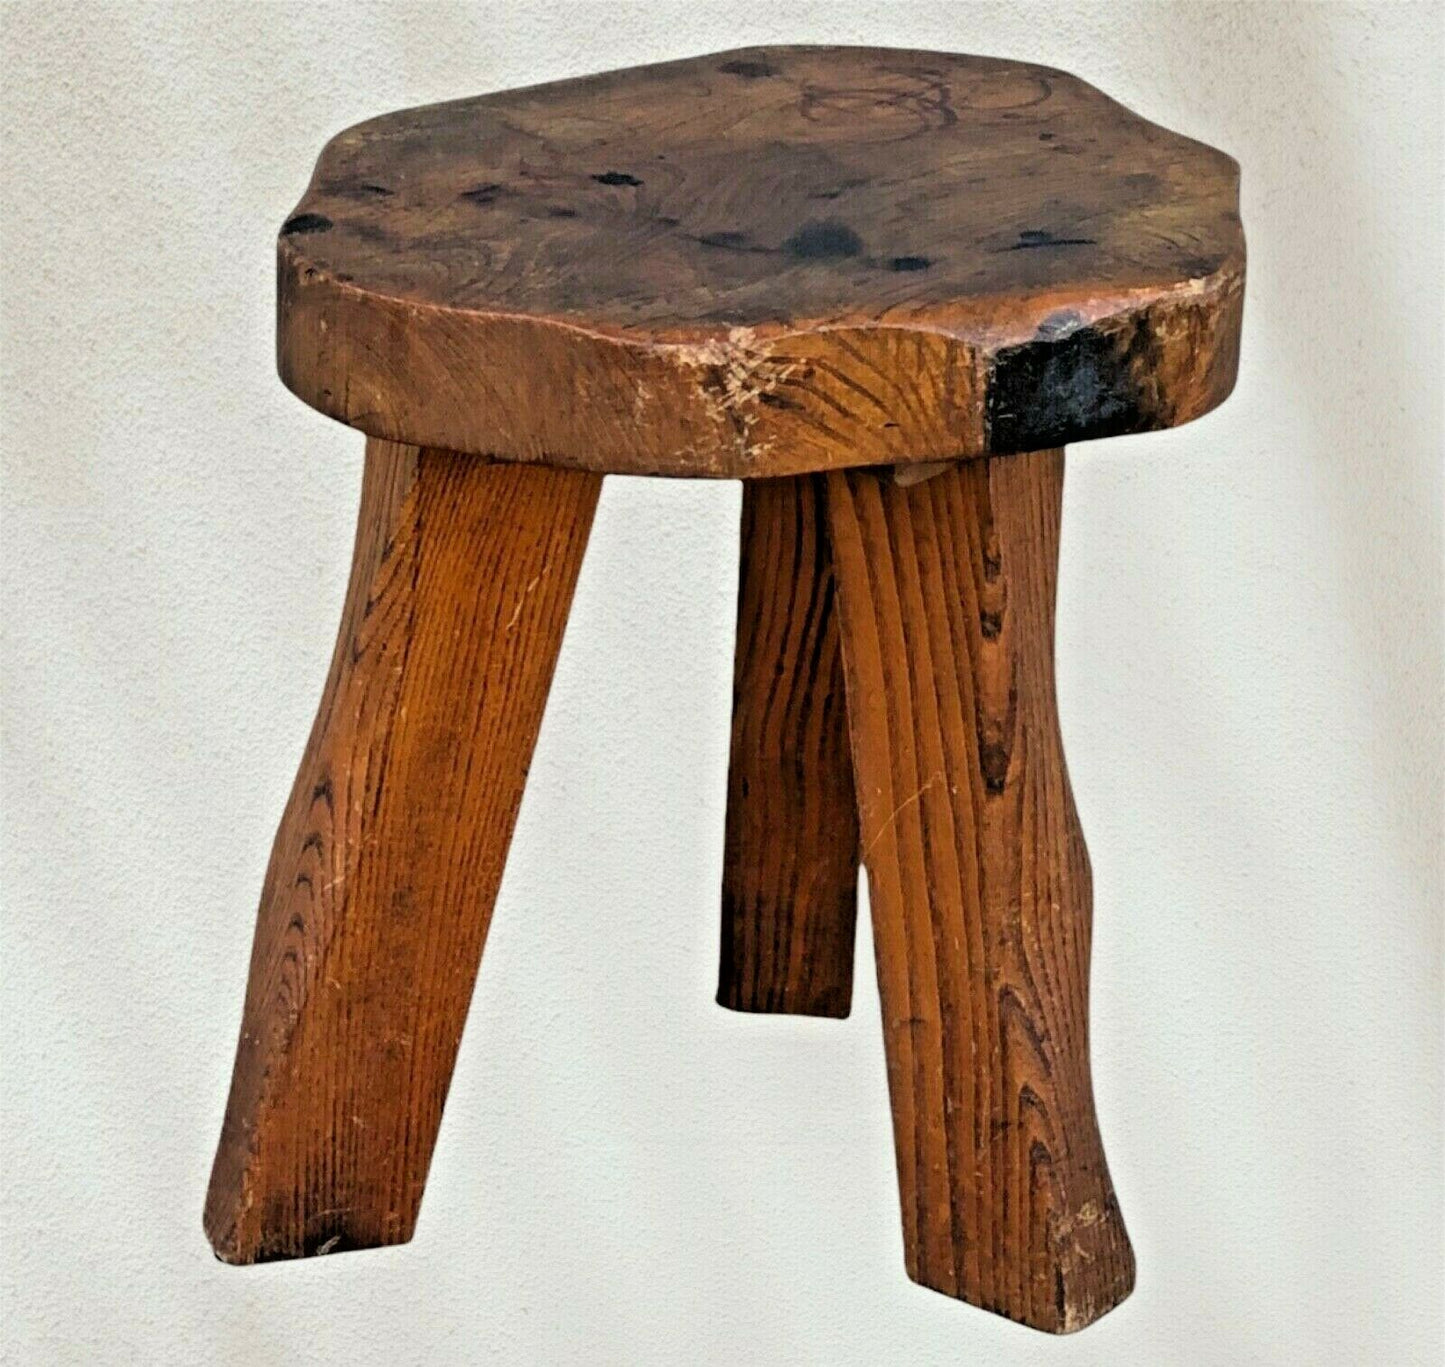 065.....Arts And Crafts Solid Elm Stool By Wanderwood (sold )